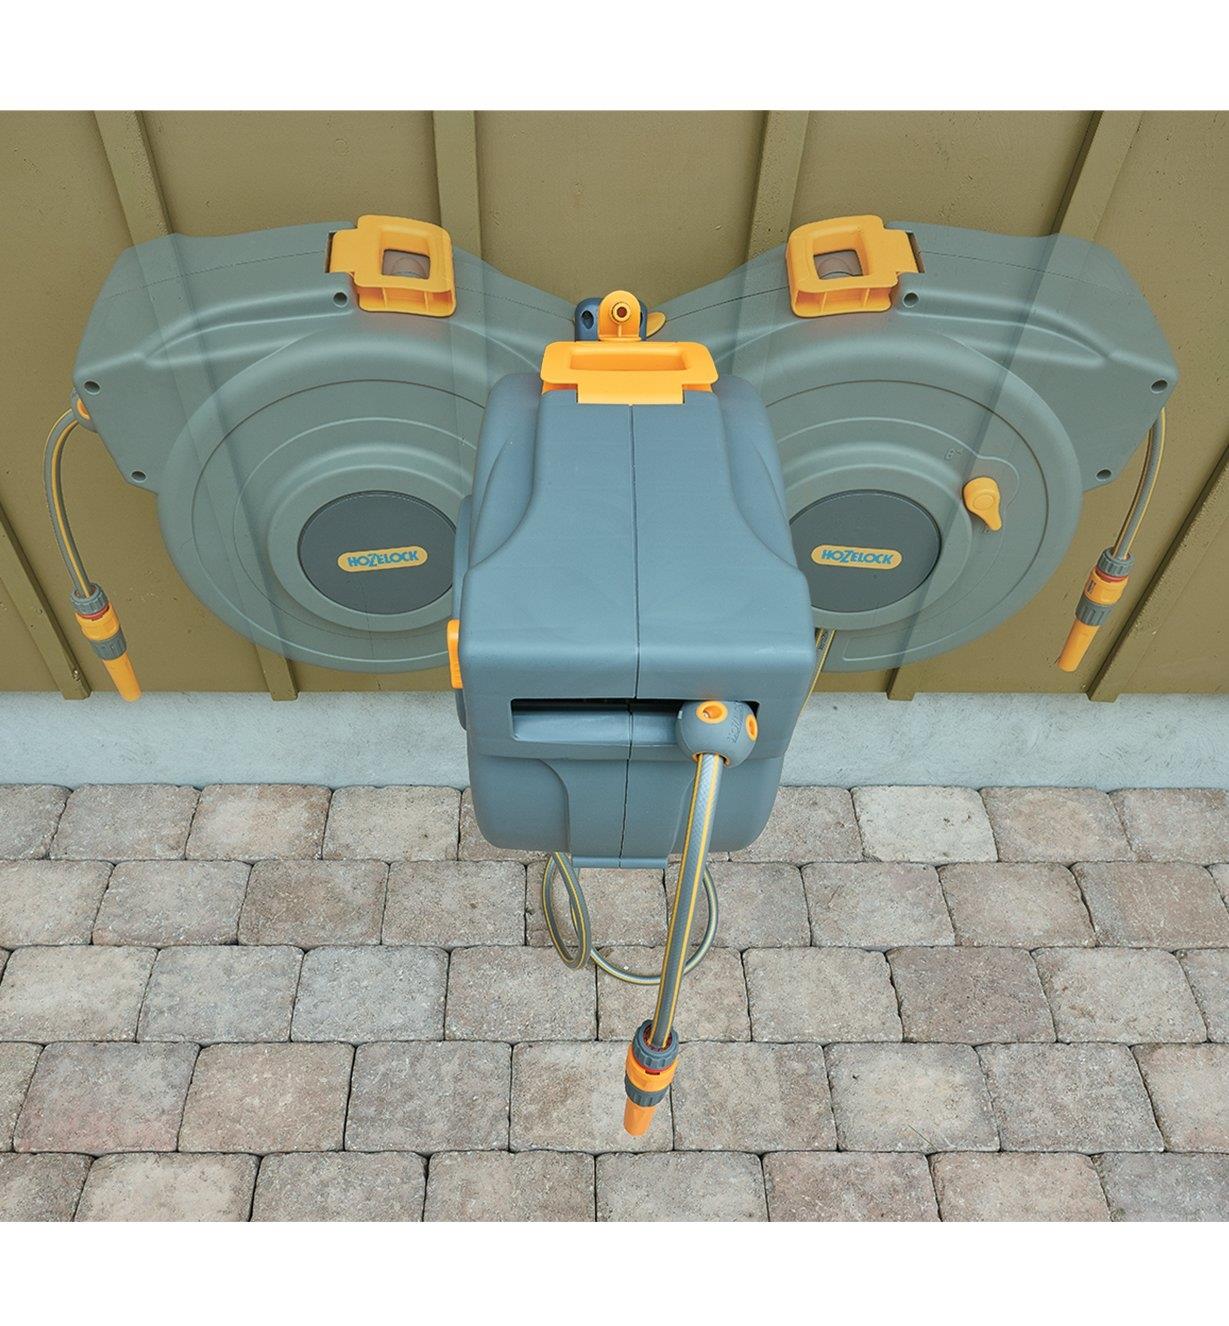 Ghosted image shows the pivoting action of the hose reel